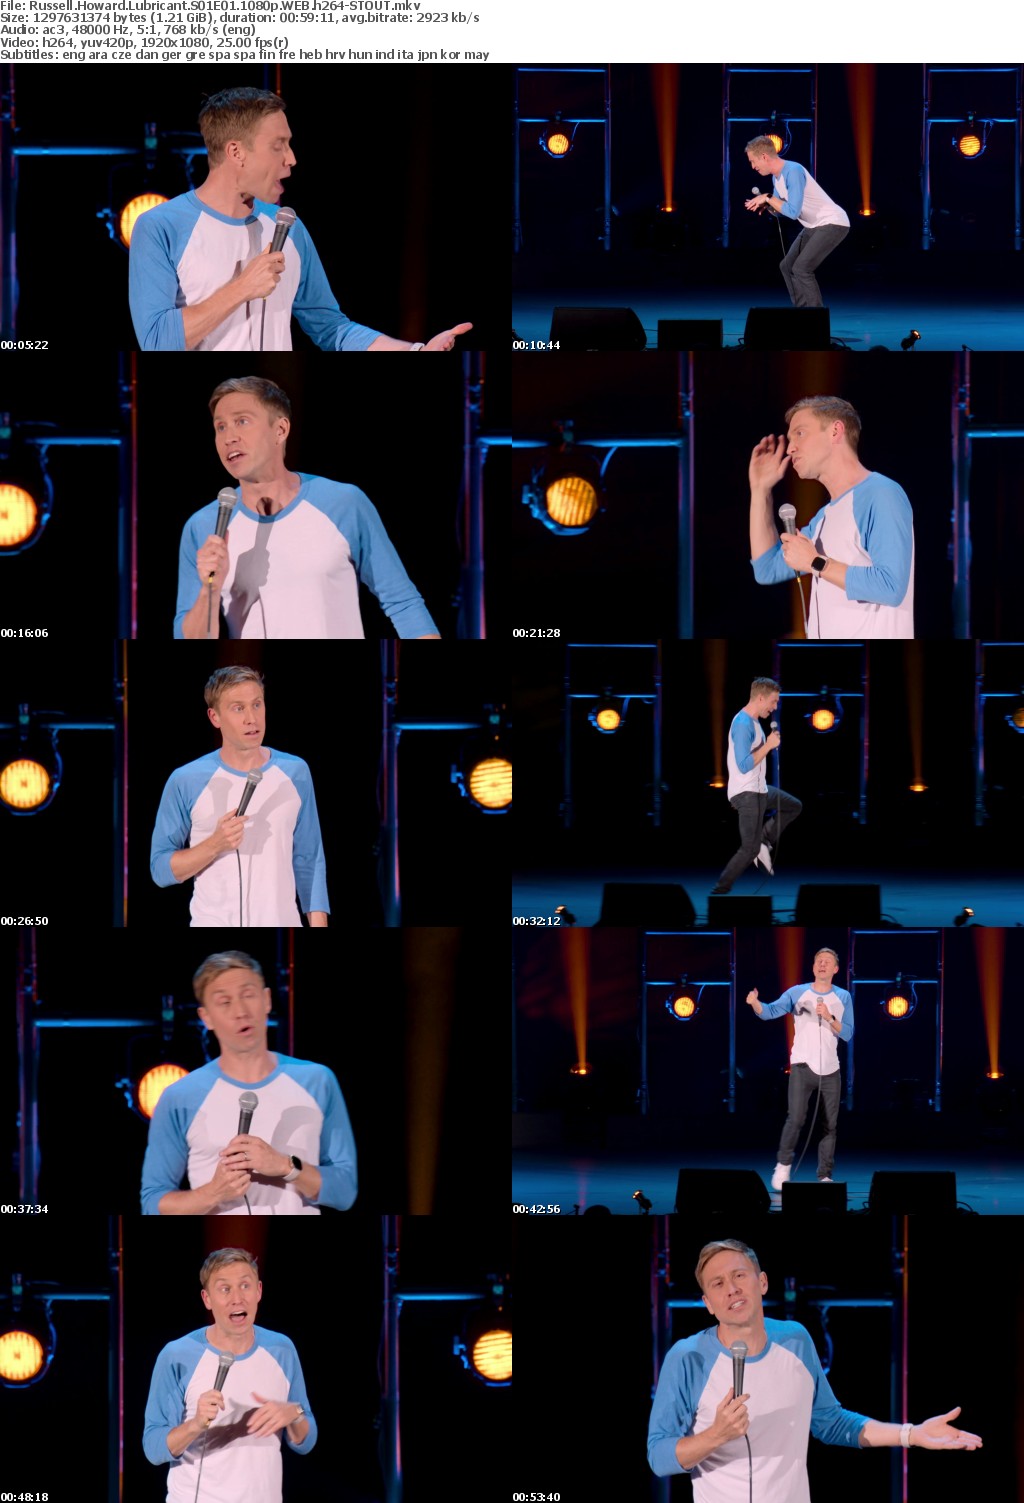 Russell Howard Lubricant S01 1080p NF WEBRip DDP5 1 x264-STOUT